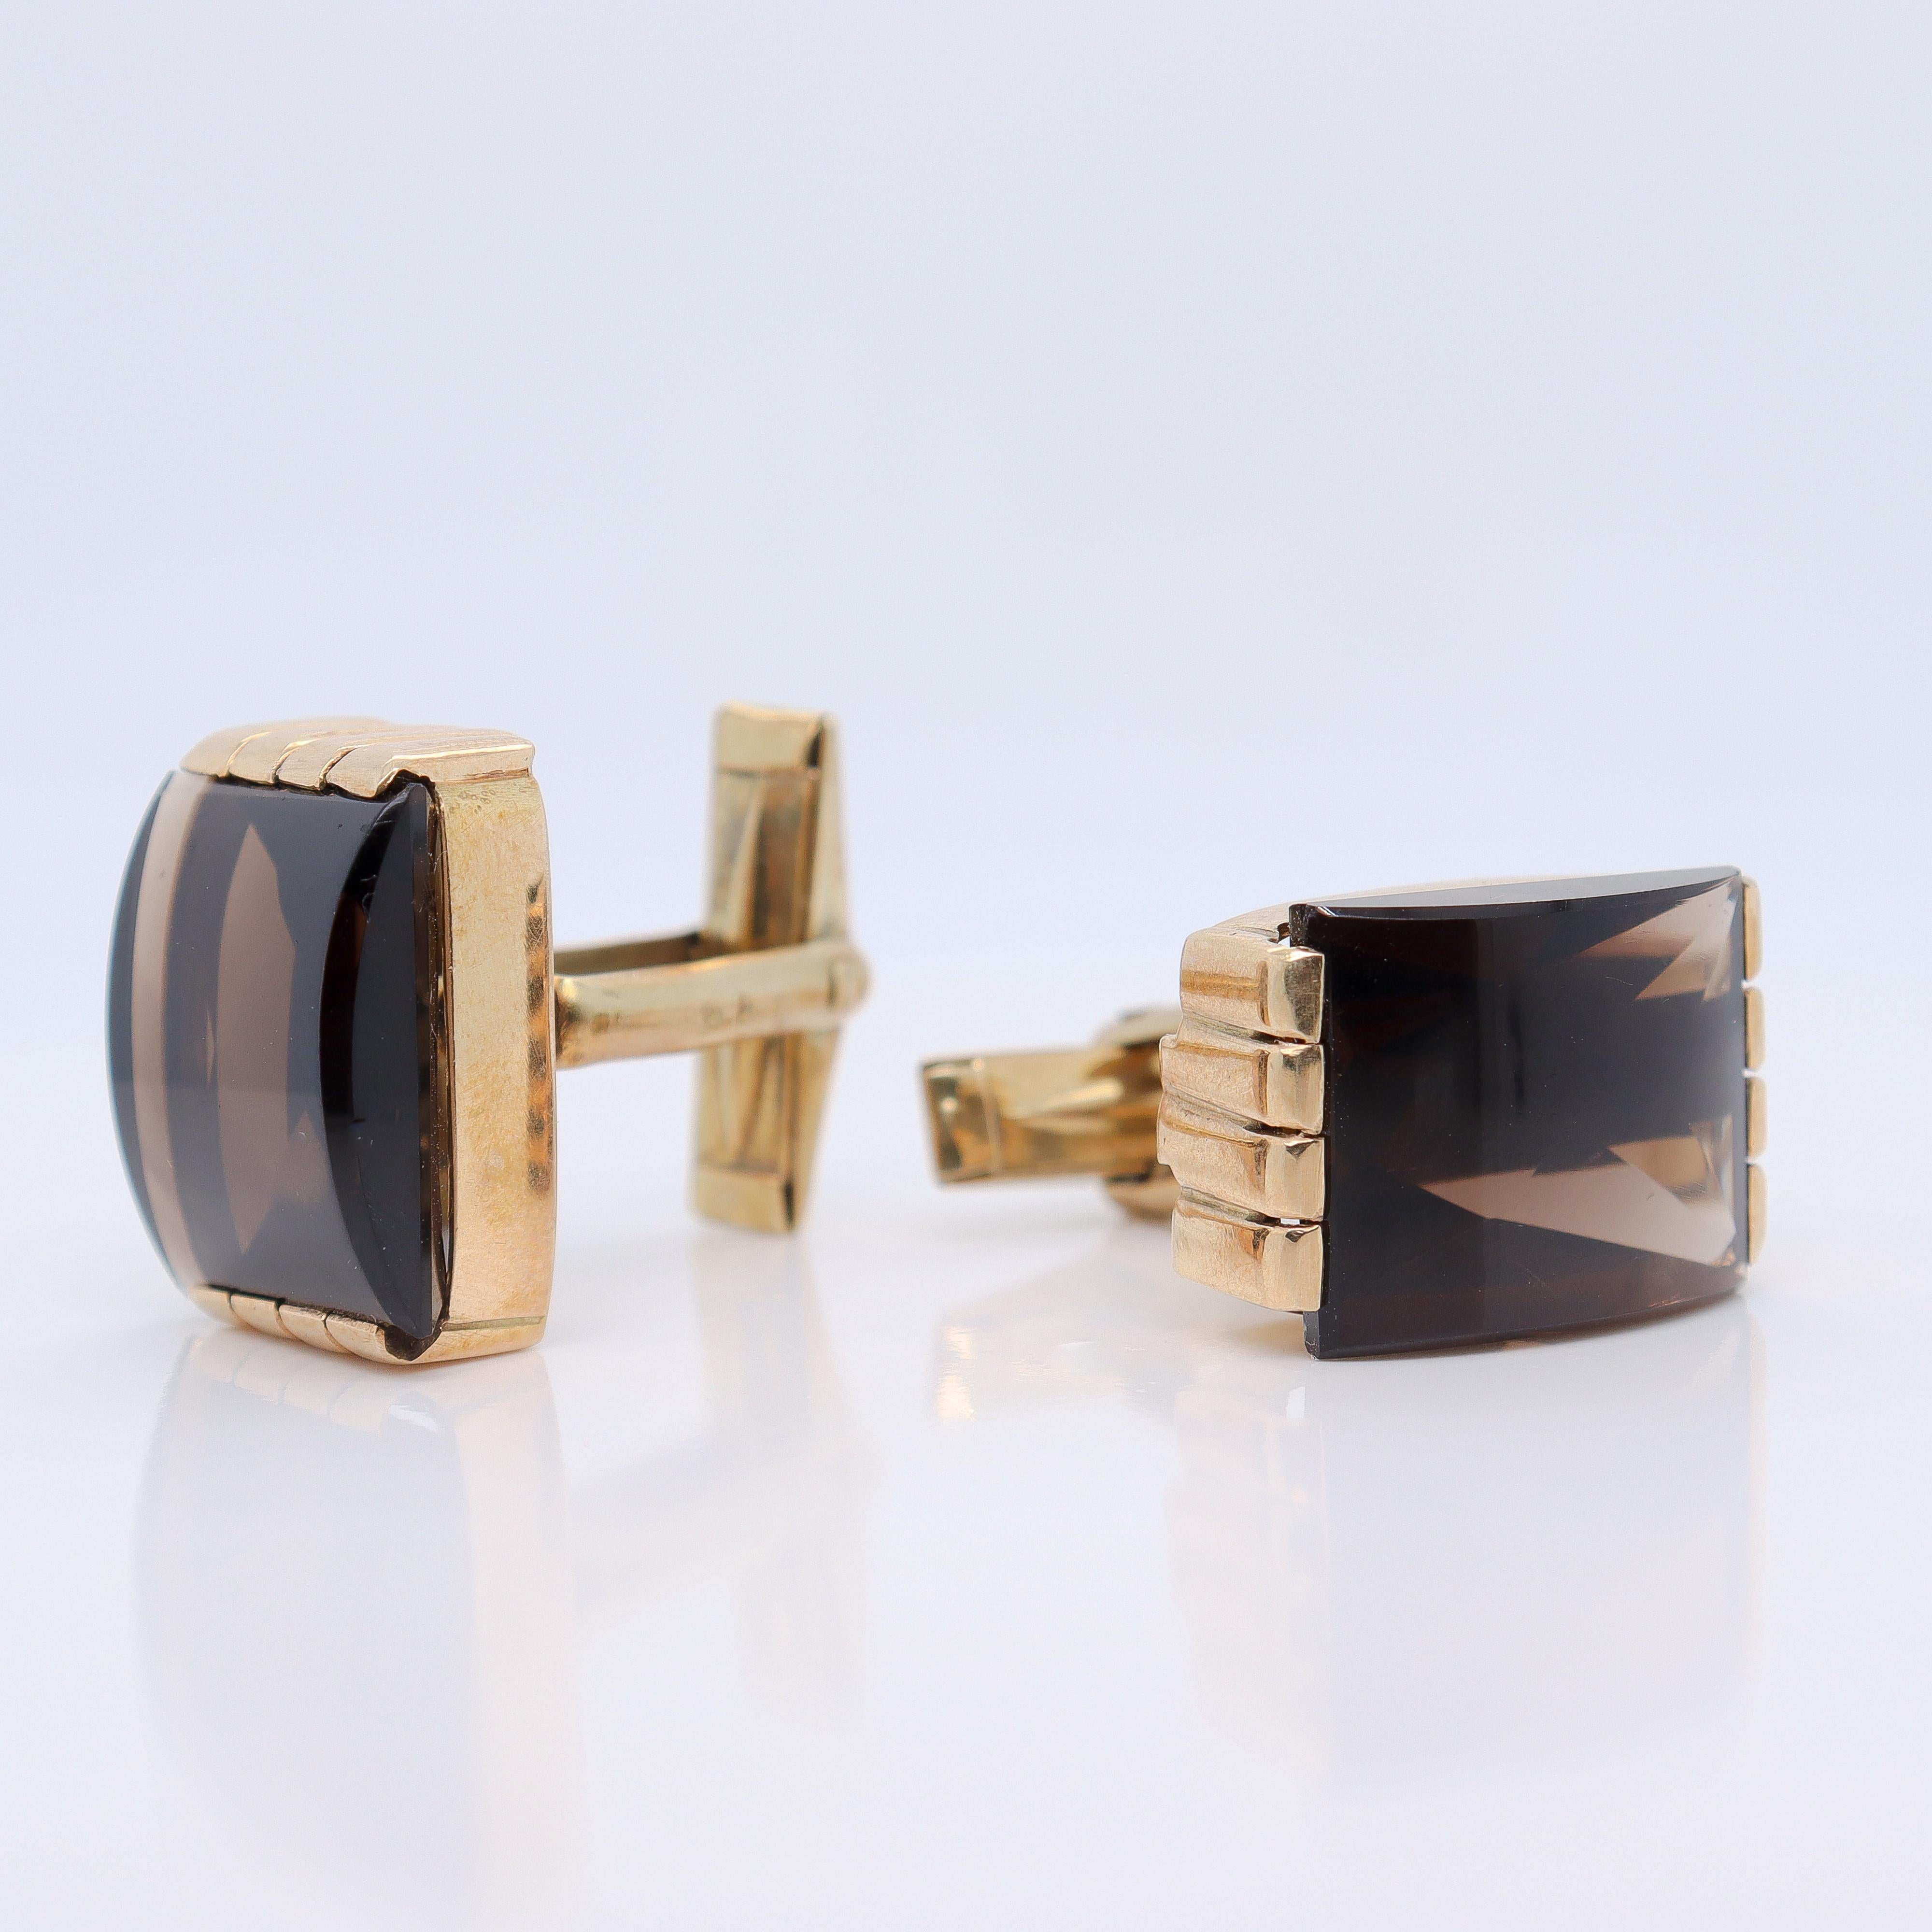 A fine pair of antique Austrian Art Deco cufflinks.

In 14k yellow gold. 

Set with buff top smoky quartz cabochons in a robust geometric Art Deco setting.

Marked with Austro-Hungarian hallmarks for Vienna, 585 & KR for the maker. (The maker